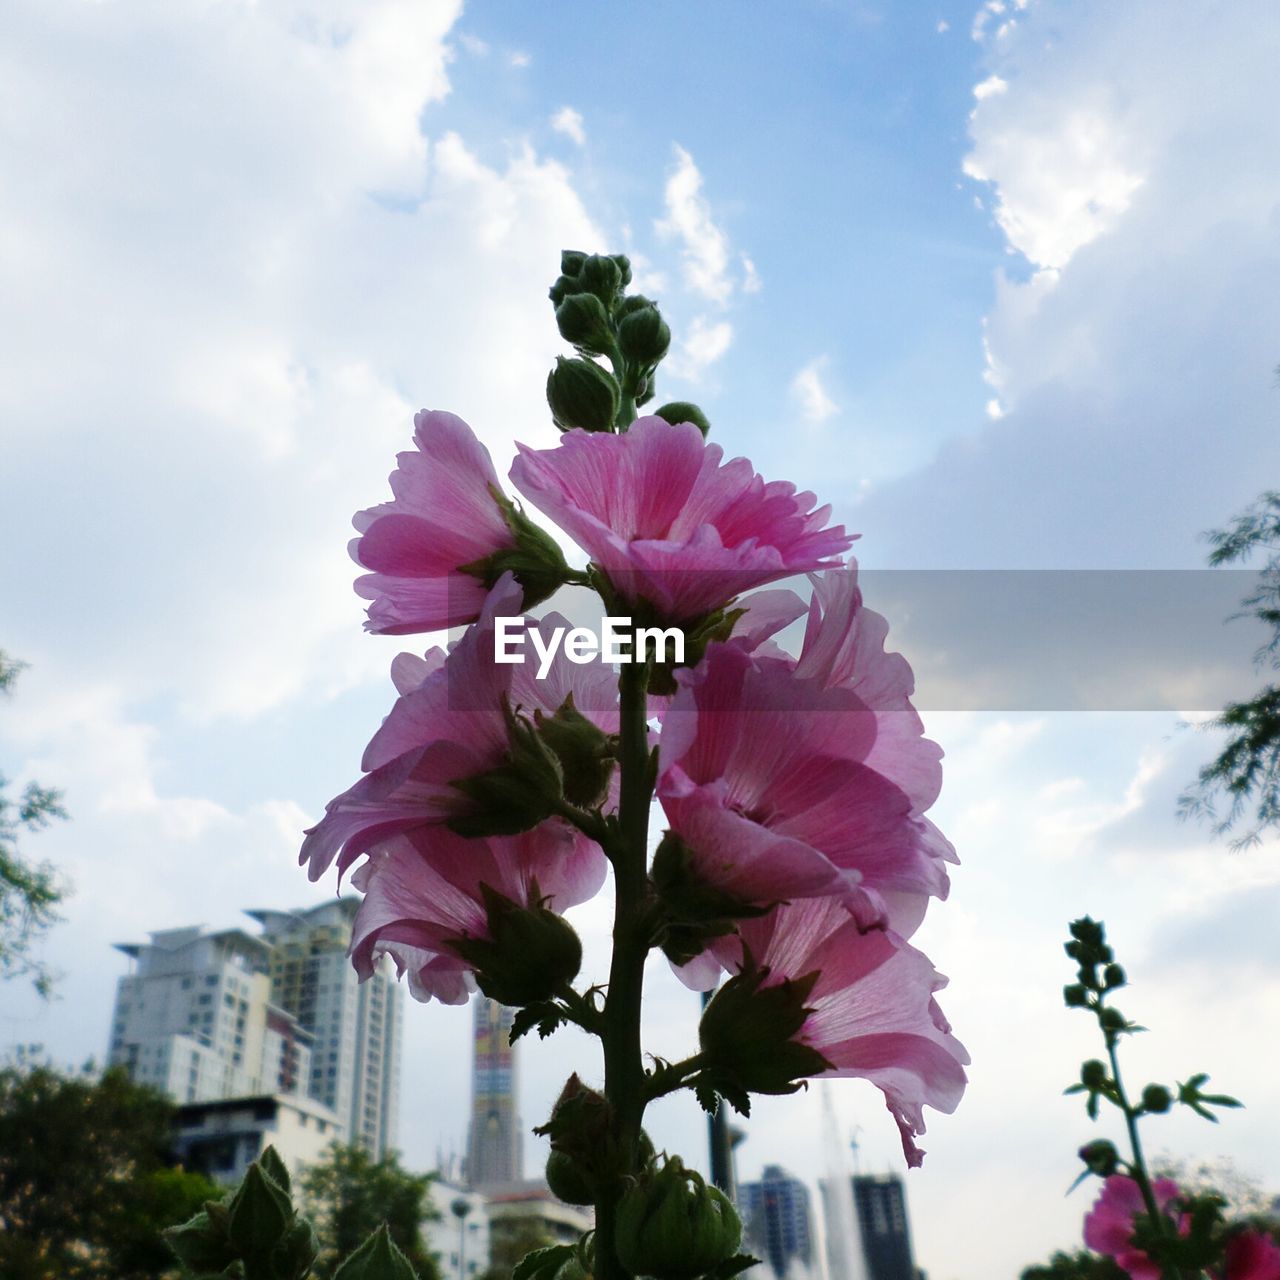 LOW ANGLE VIEW OF PINK FLOWERS AGAINST SKY